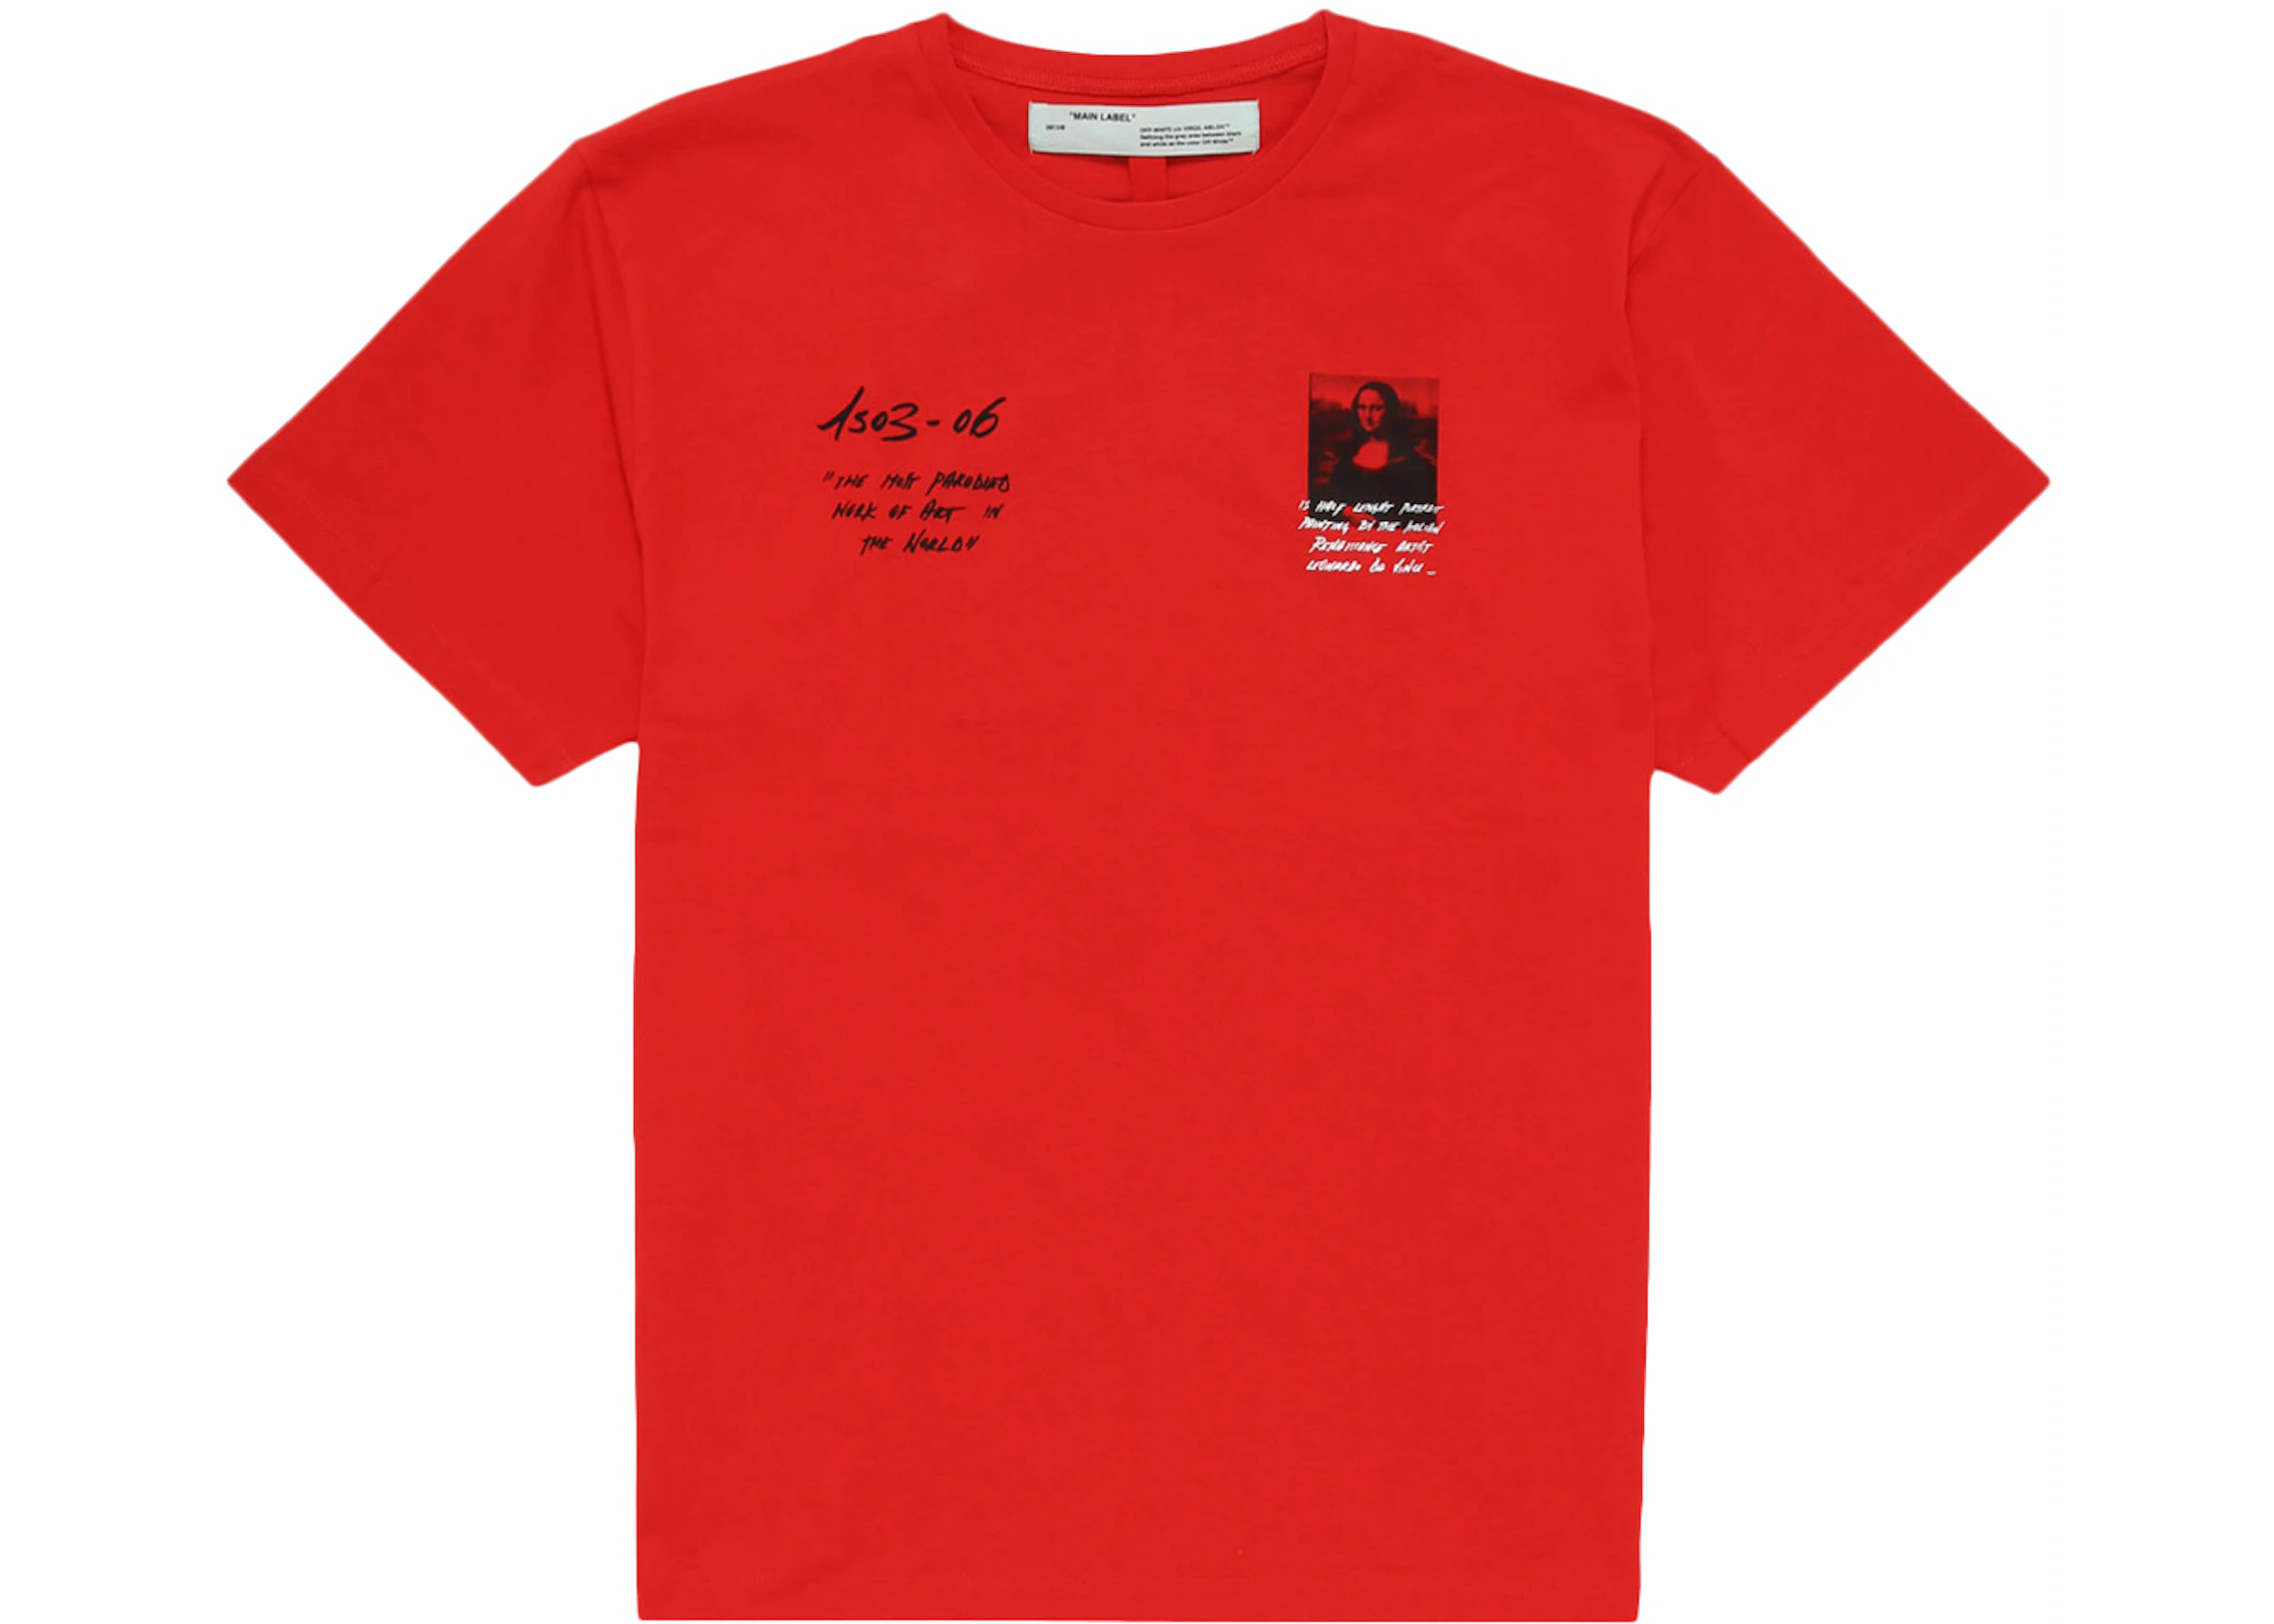 OFF-WHITE Oversized Monalisa Graphic Print T-Shirt Red - SS19 -